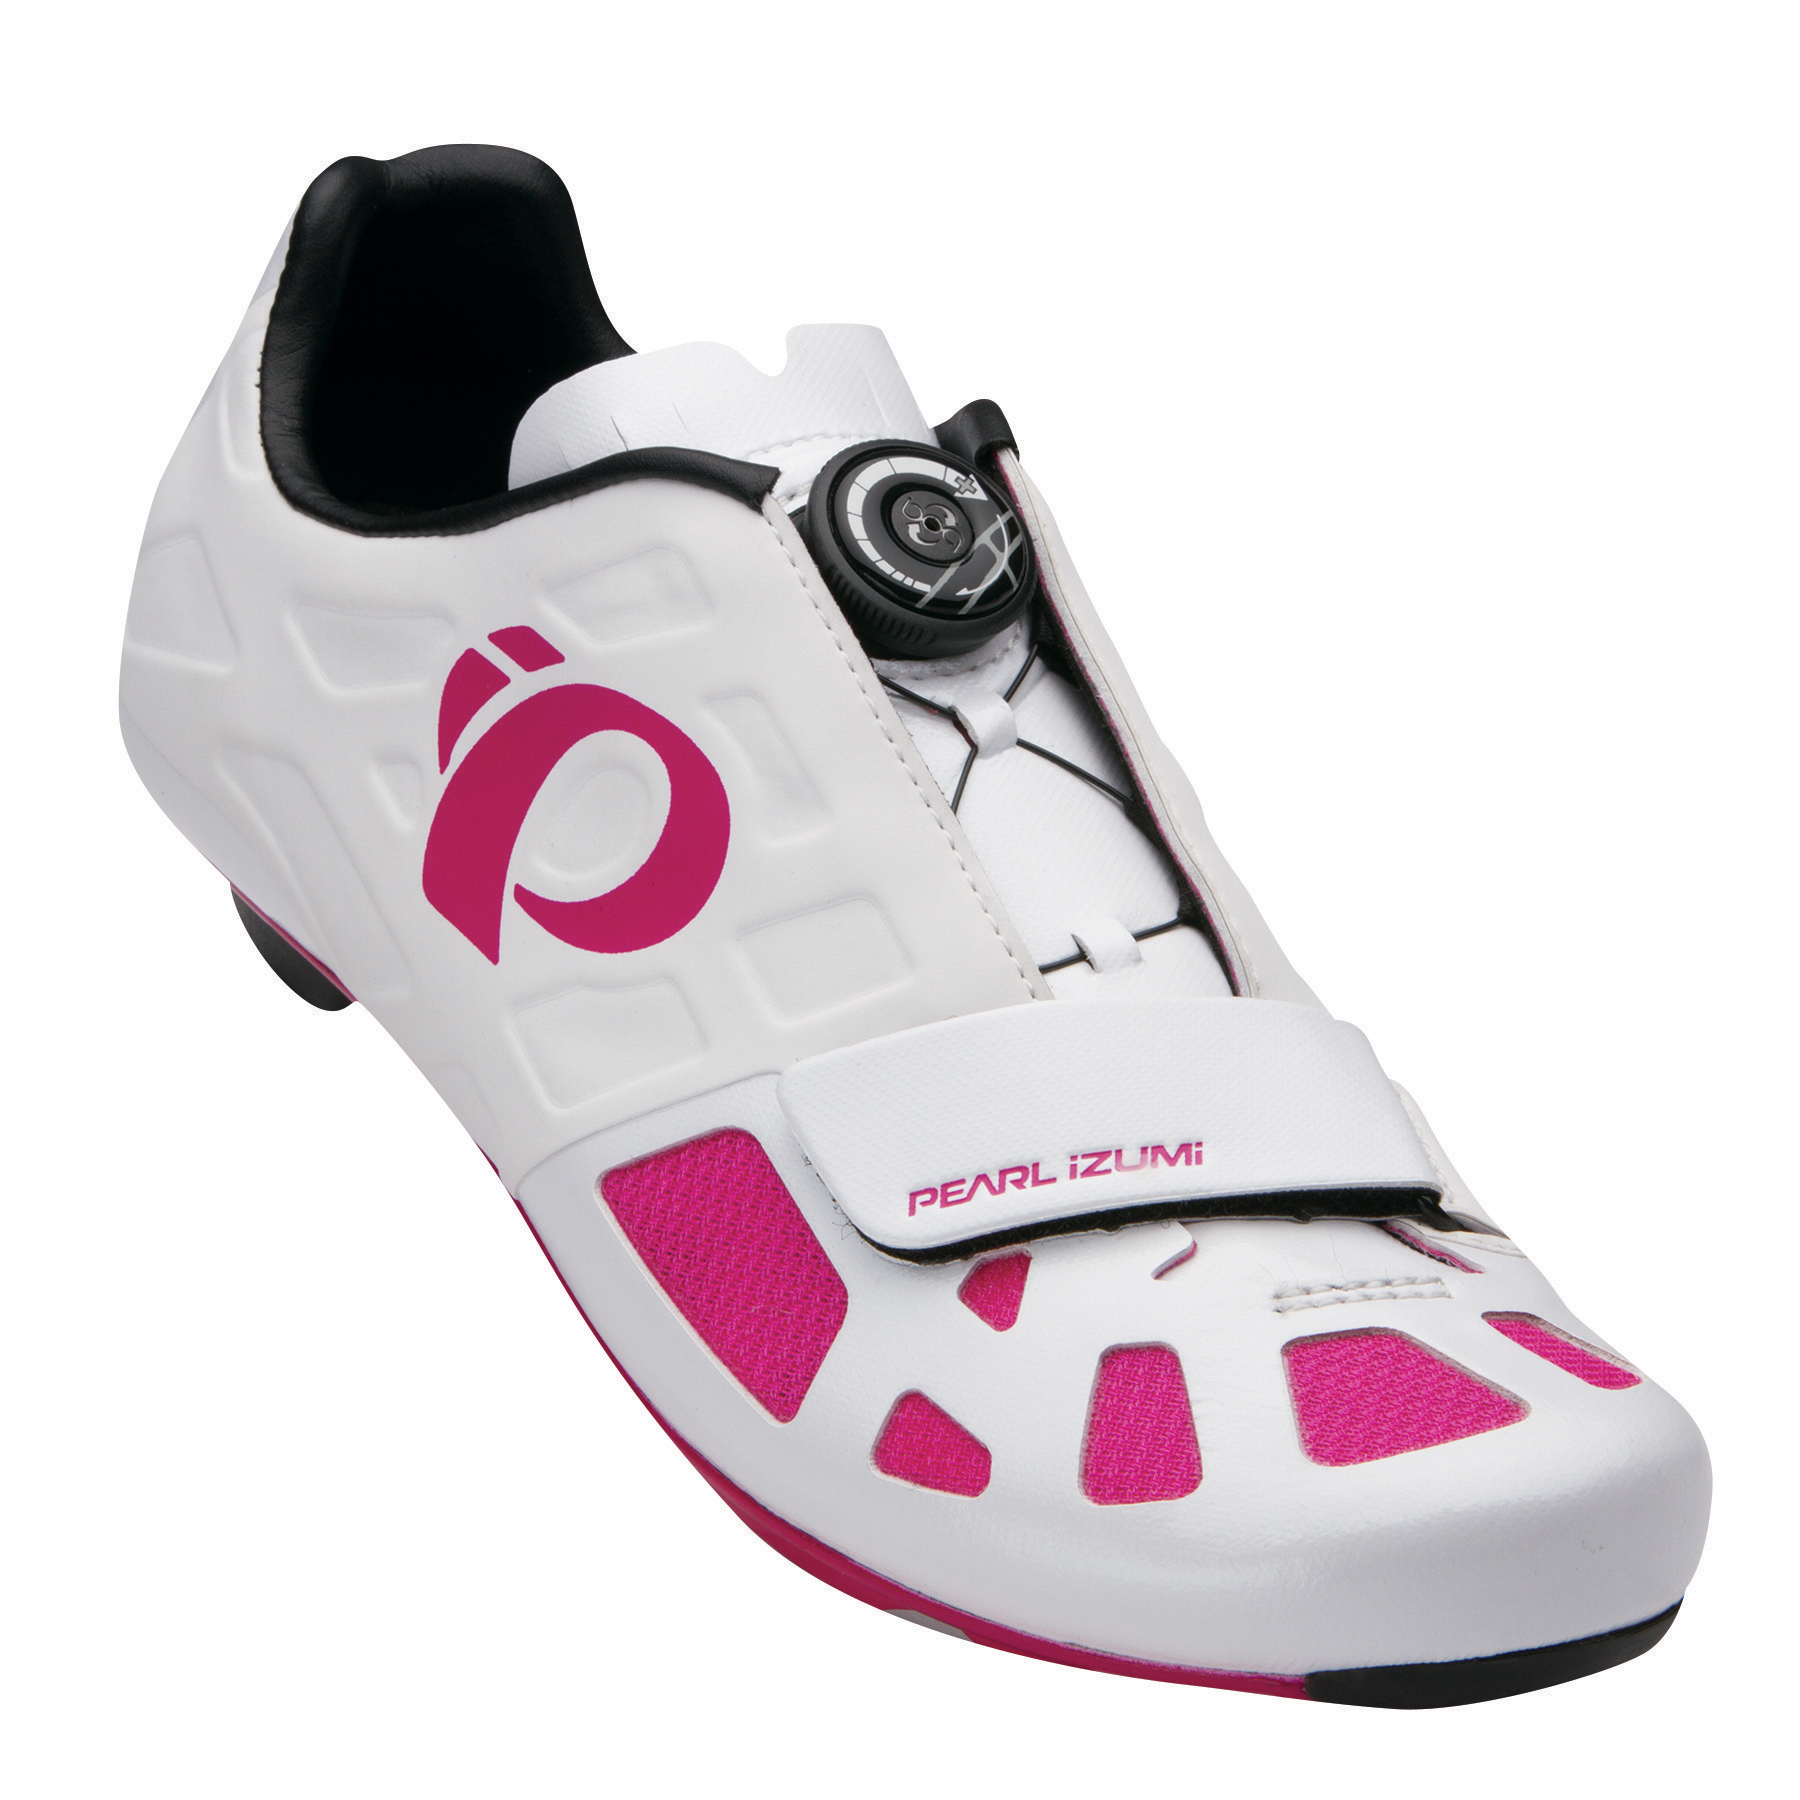 womens road cycling shoes size 39